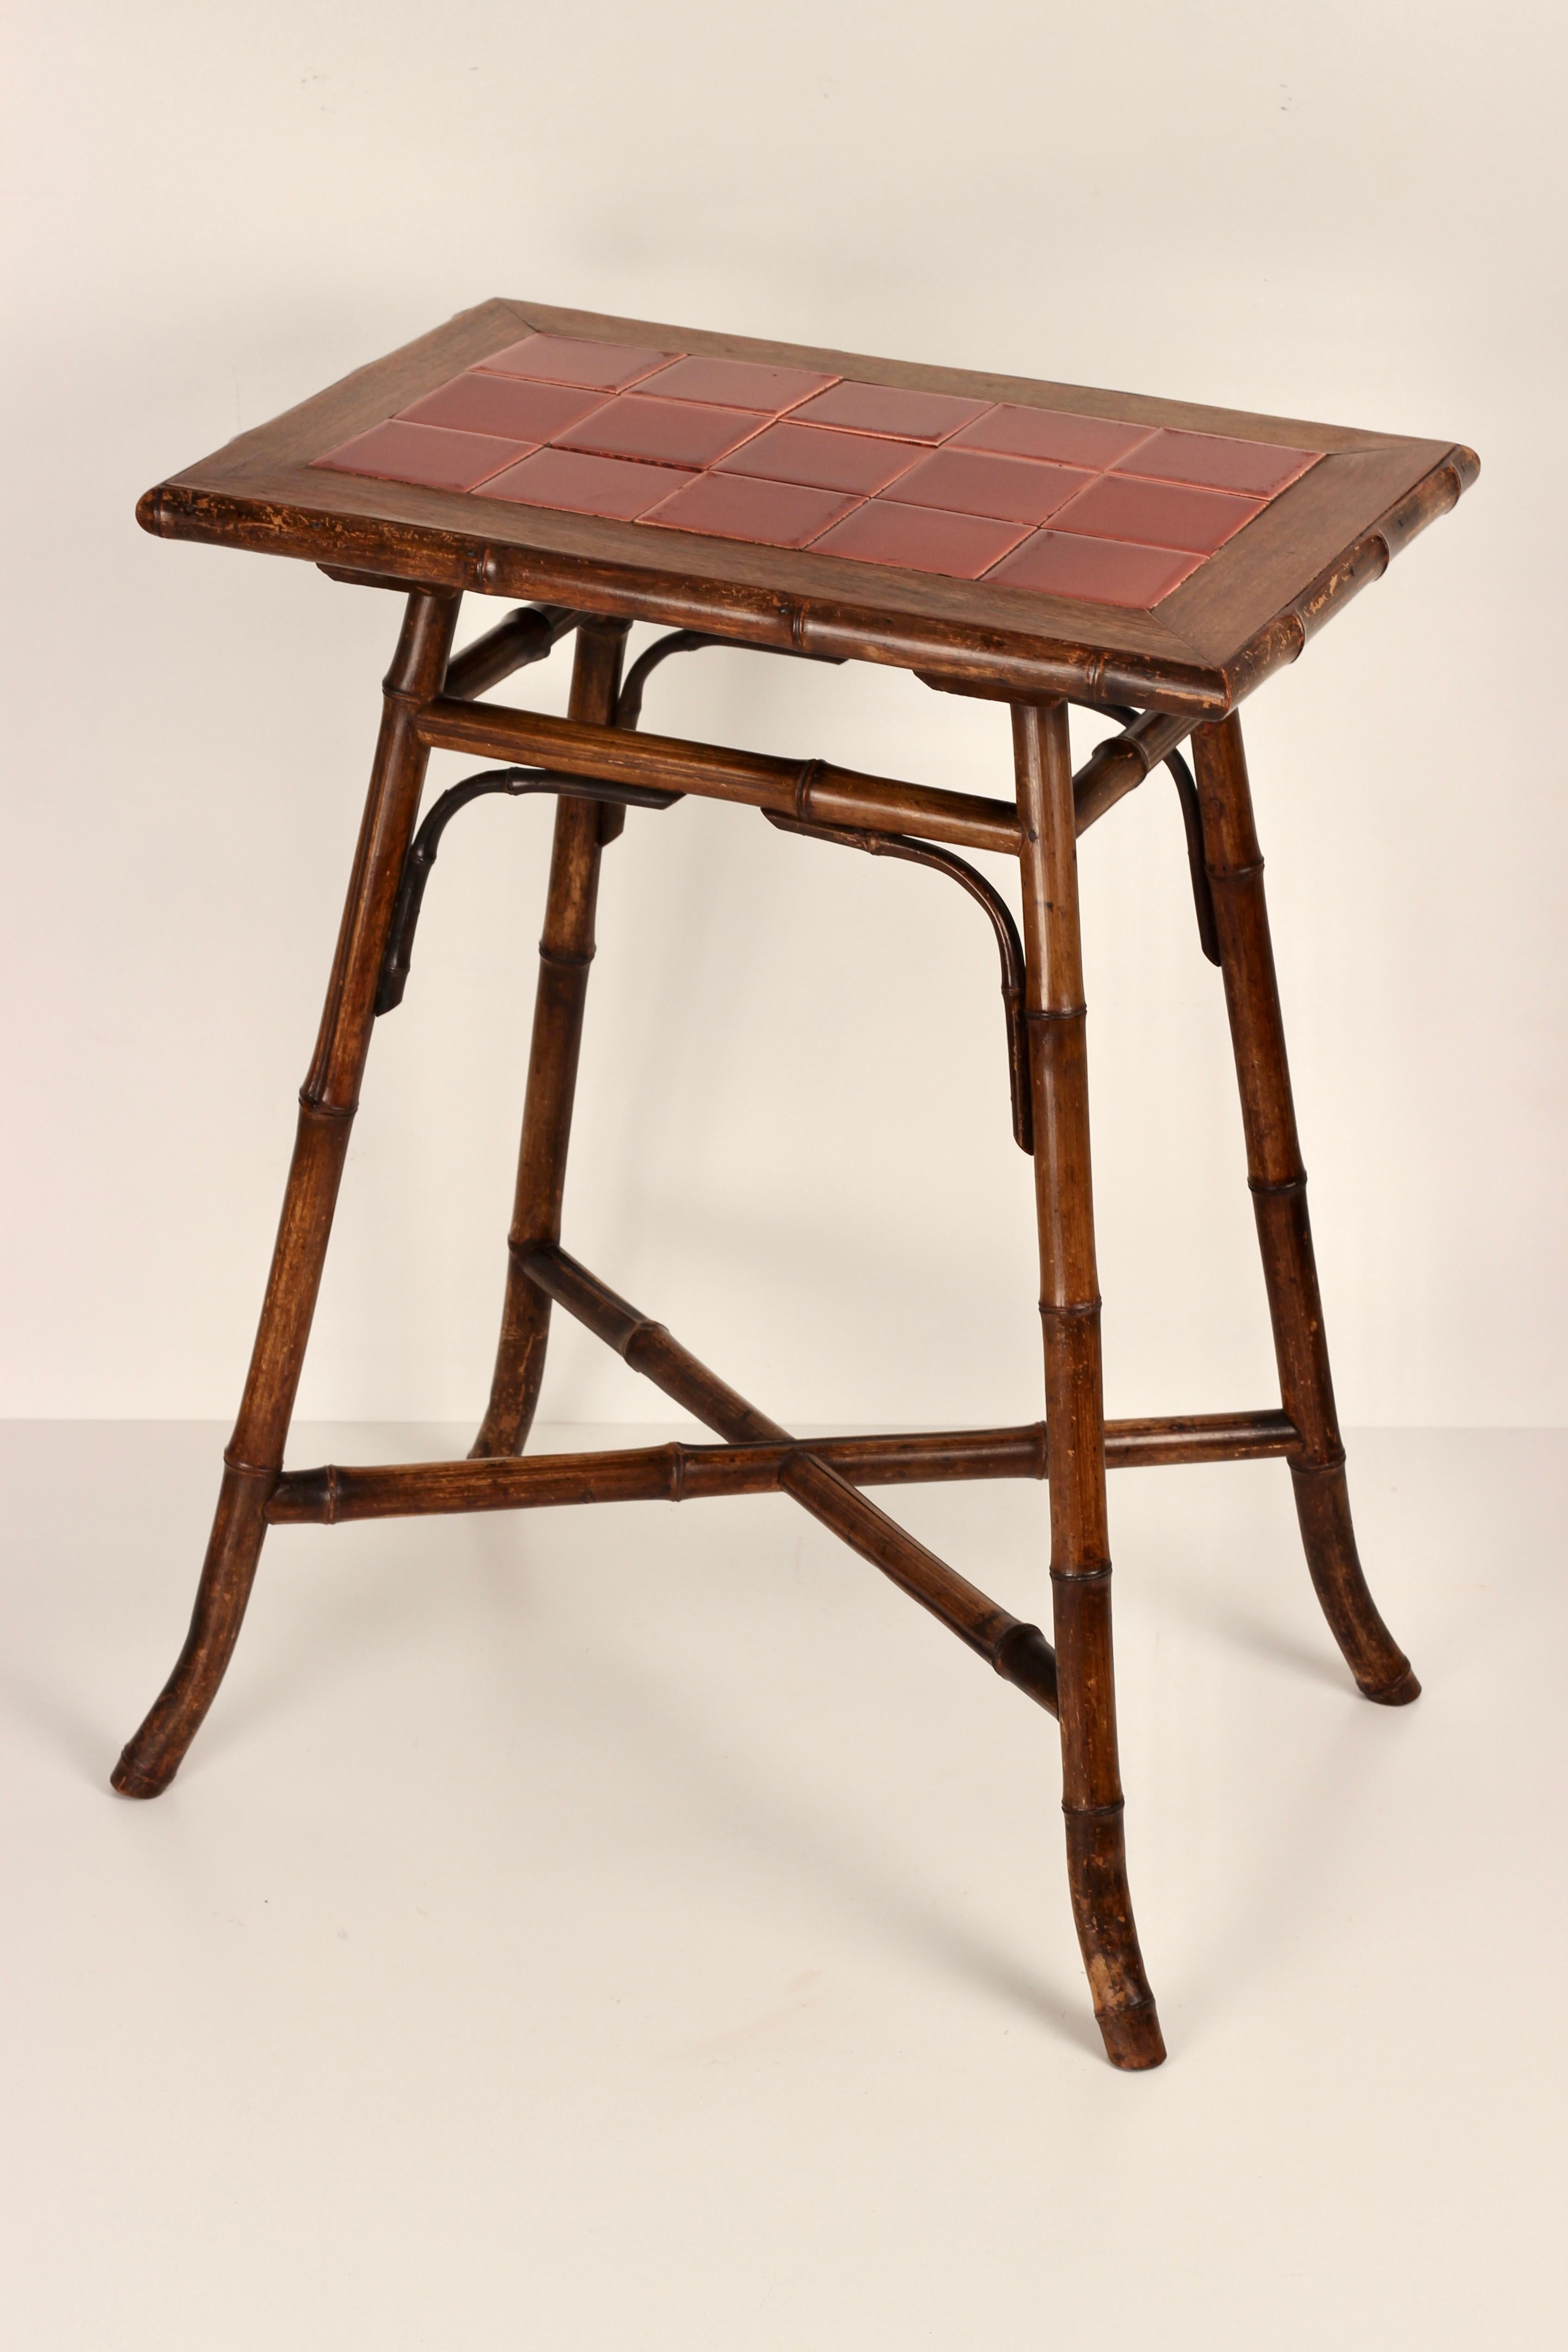 British Boho Chic Steam Bent Bamboo Side Table with Deep Red Ceramic Tiled Top 1890’s For Sale